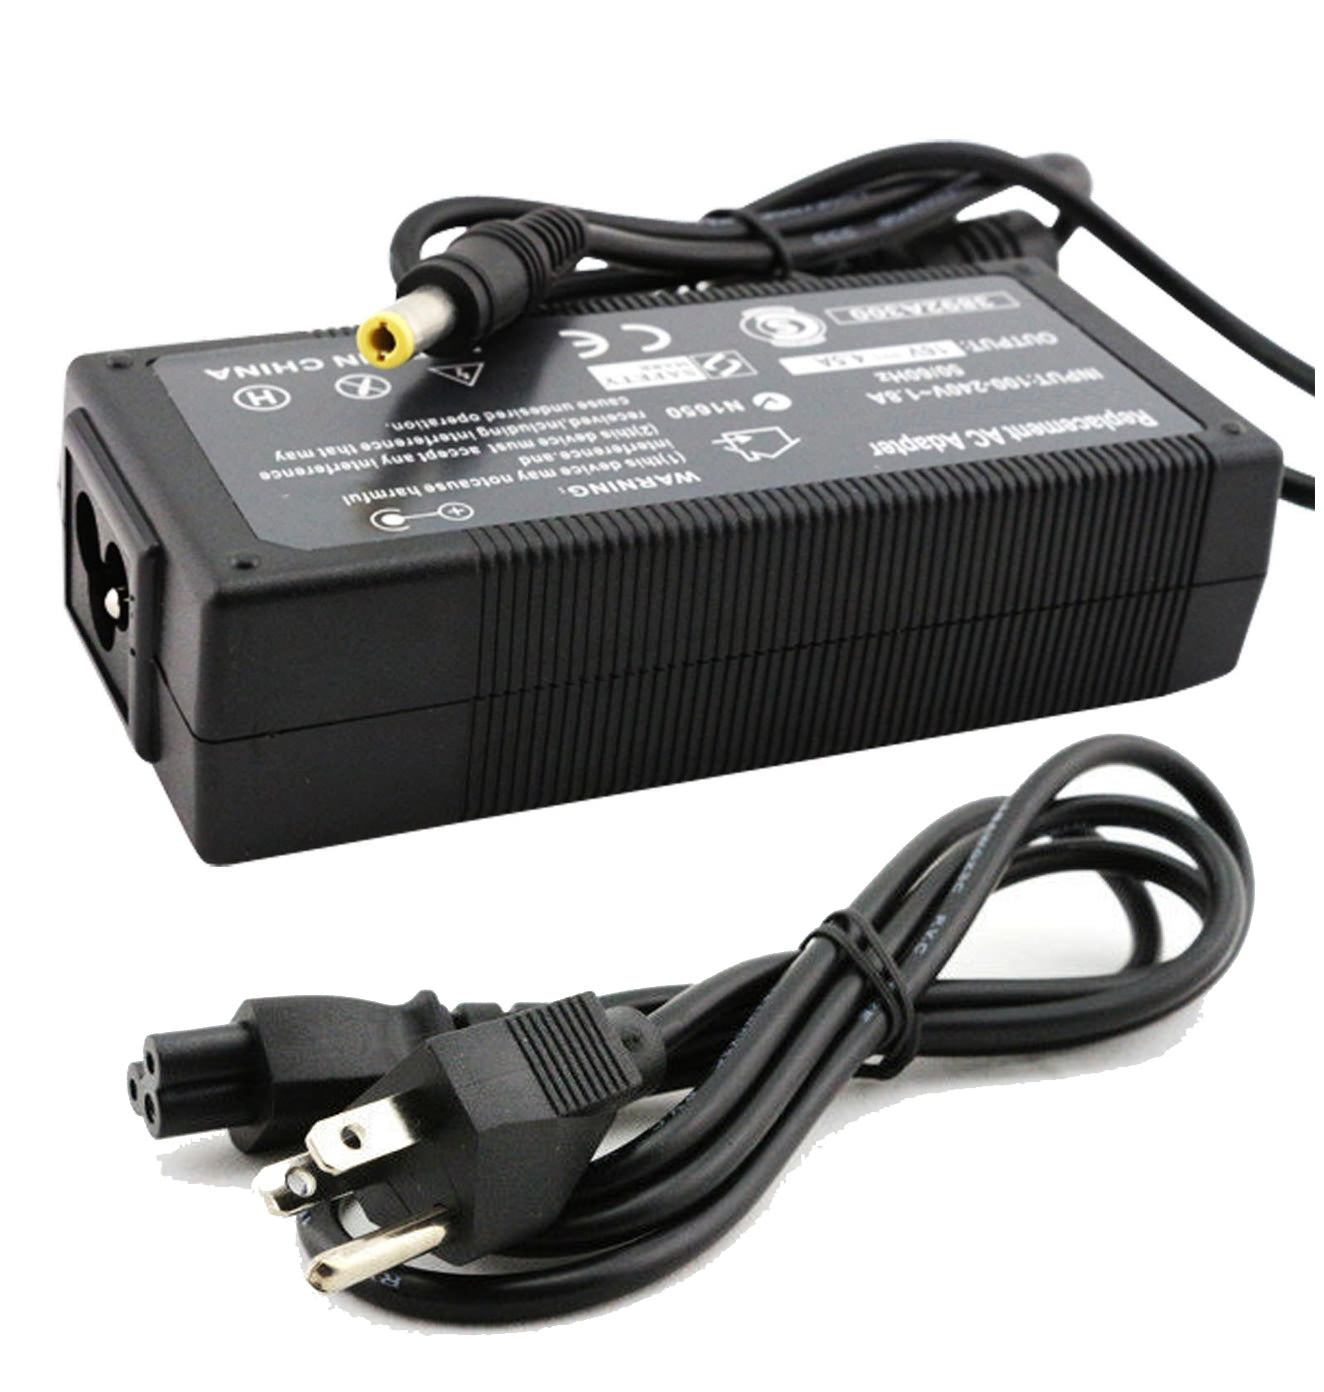 AC Adapter Charger for IBM ThinkPad A22 Notebook.